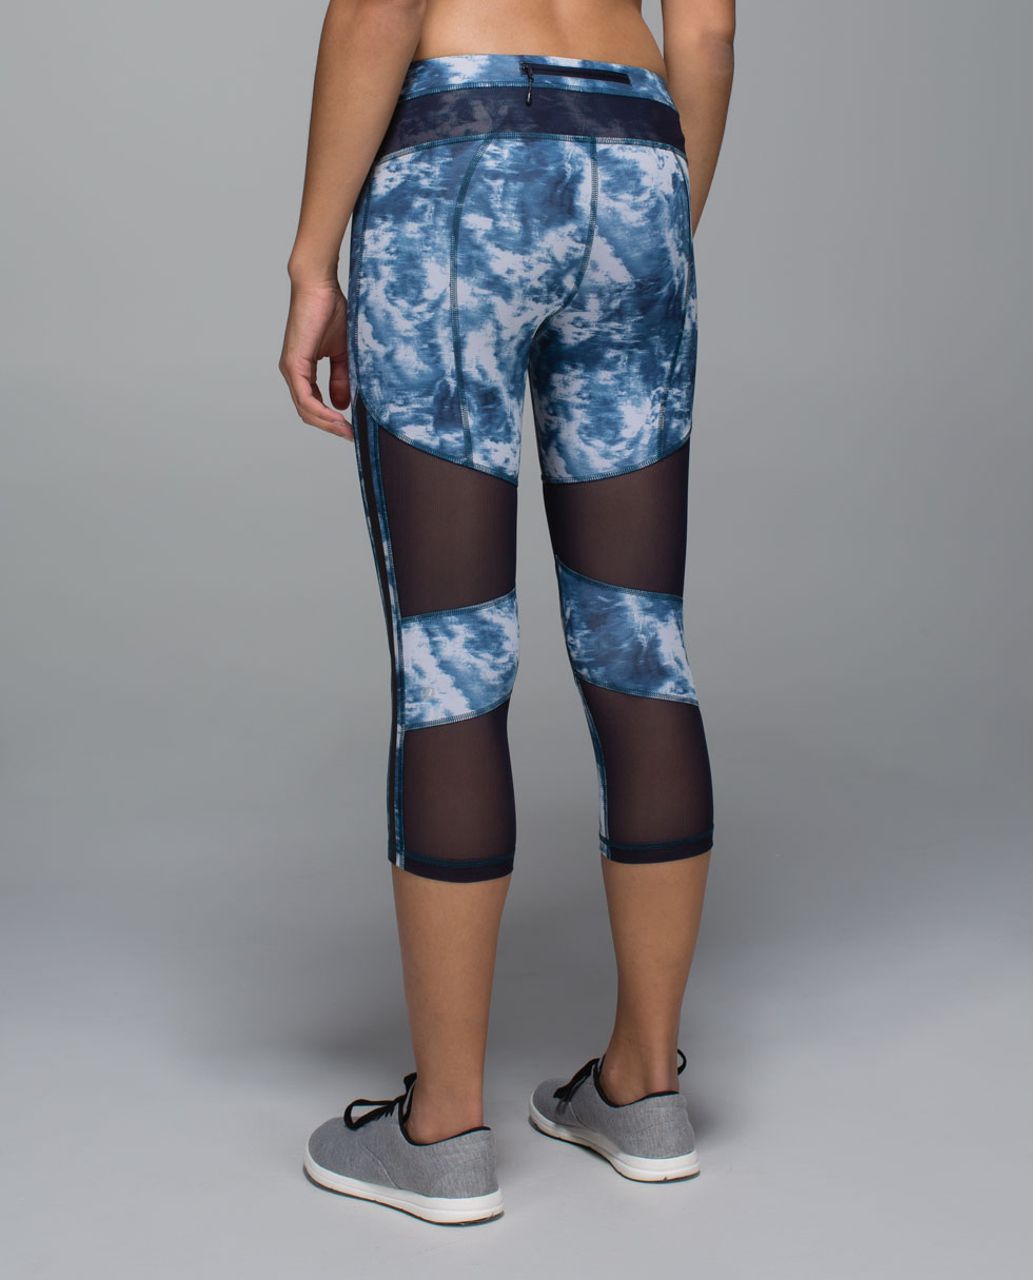 Lululemon Blue and Navy Print with Mesh Sides Cropped Leggings